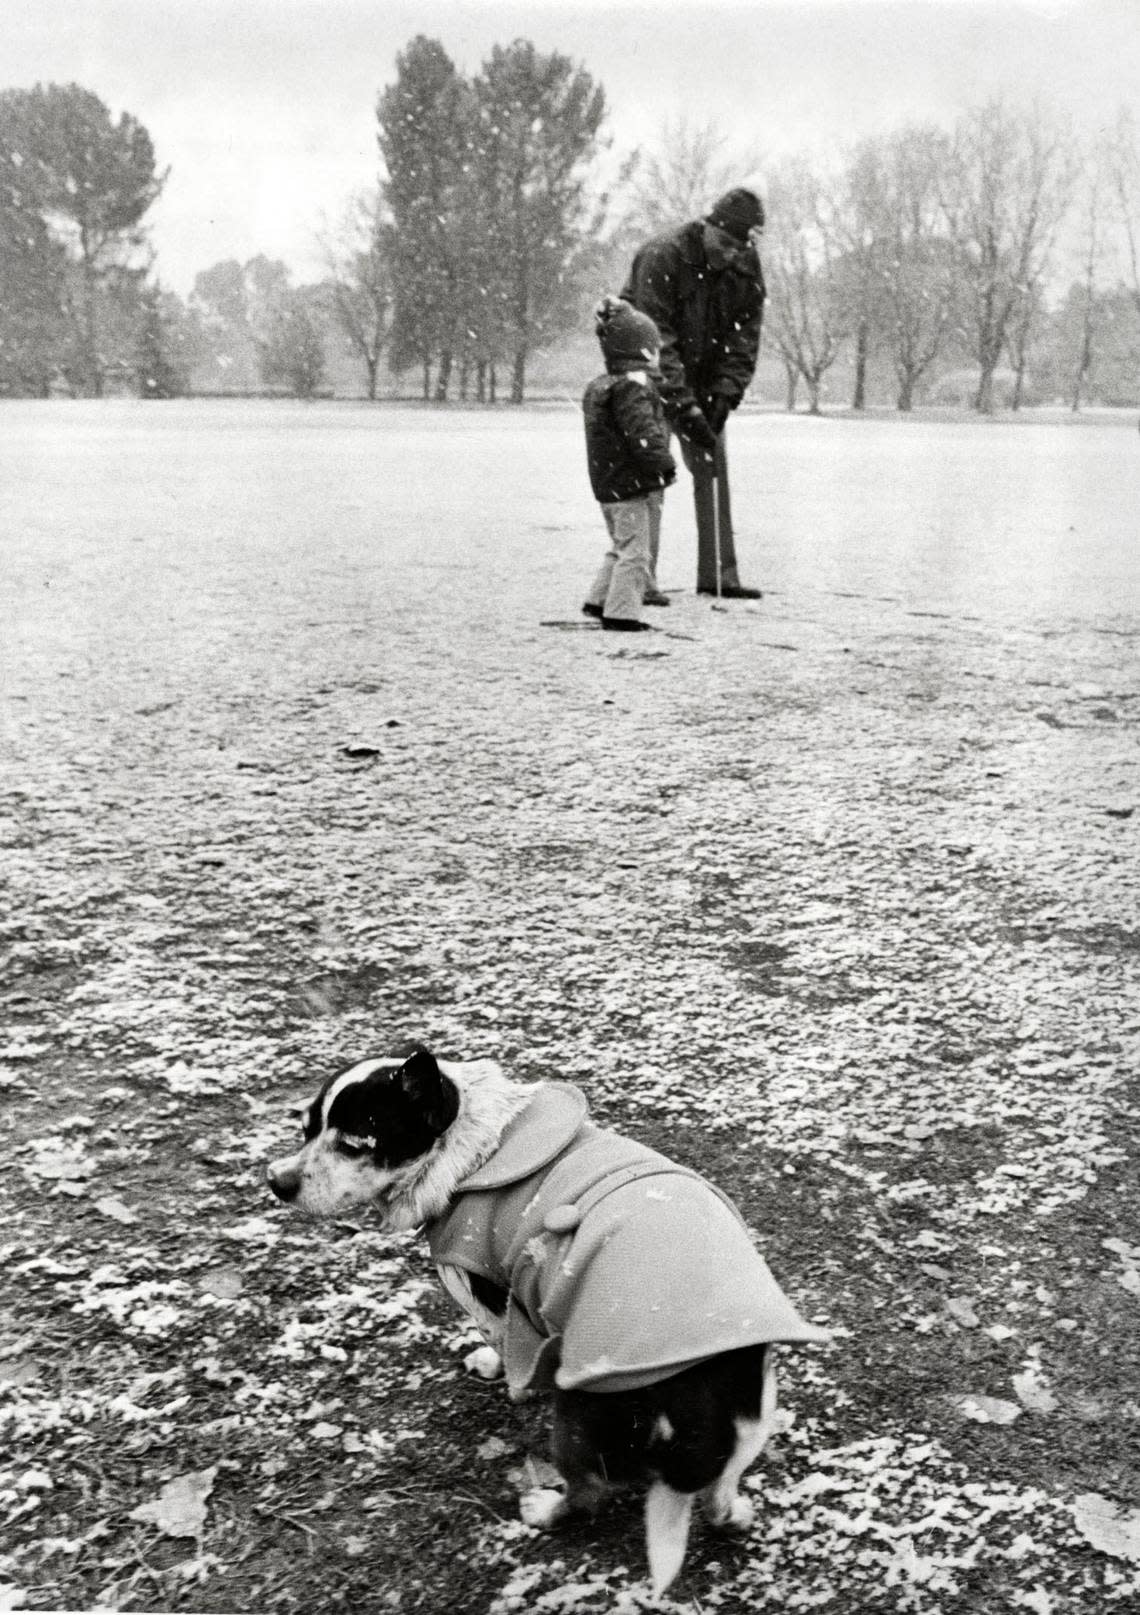 Land Park golf pro Don Oreb braves the snowy weather to give a putting lesson to 4-year-old Rickey Gregson on Feb. 5, 1976, while Chibi – despite the doggie jacket – has second thoughts about wandering around the park in the snow. Leo Neibaur/Sacramento Bee file